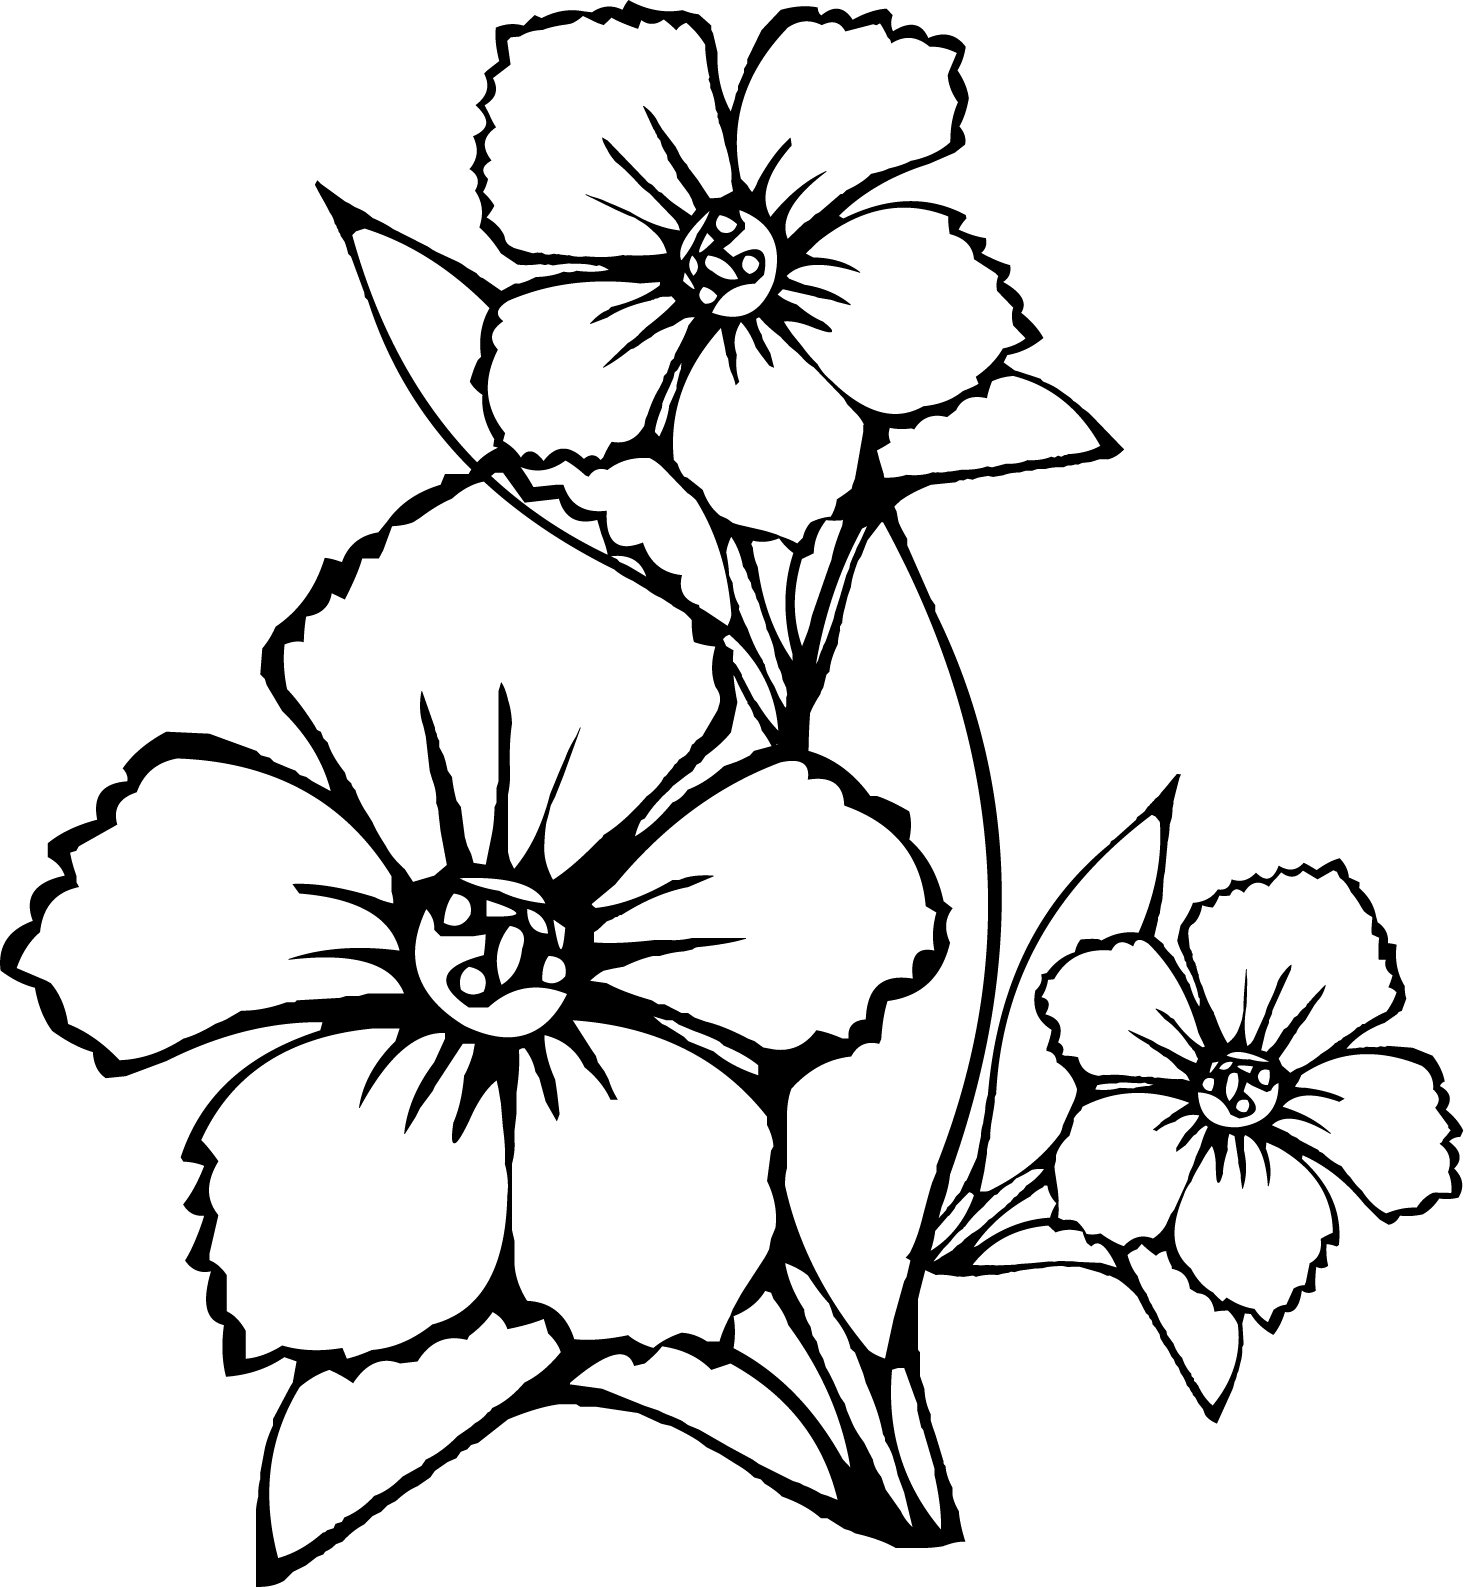 flower colouring pictures to print guitar coloring pages to print colouring to pictures flower print 